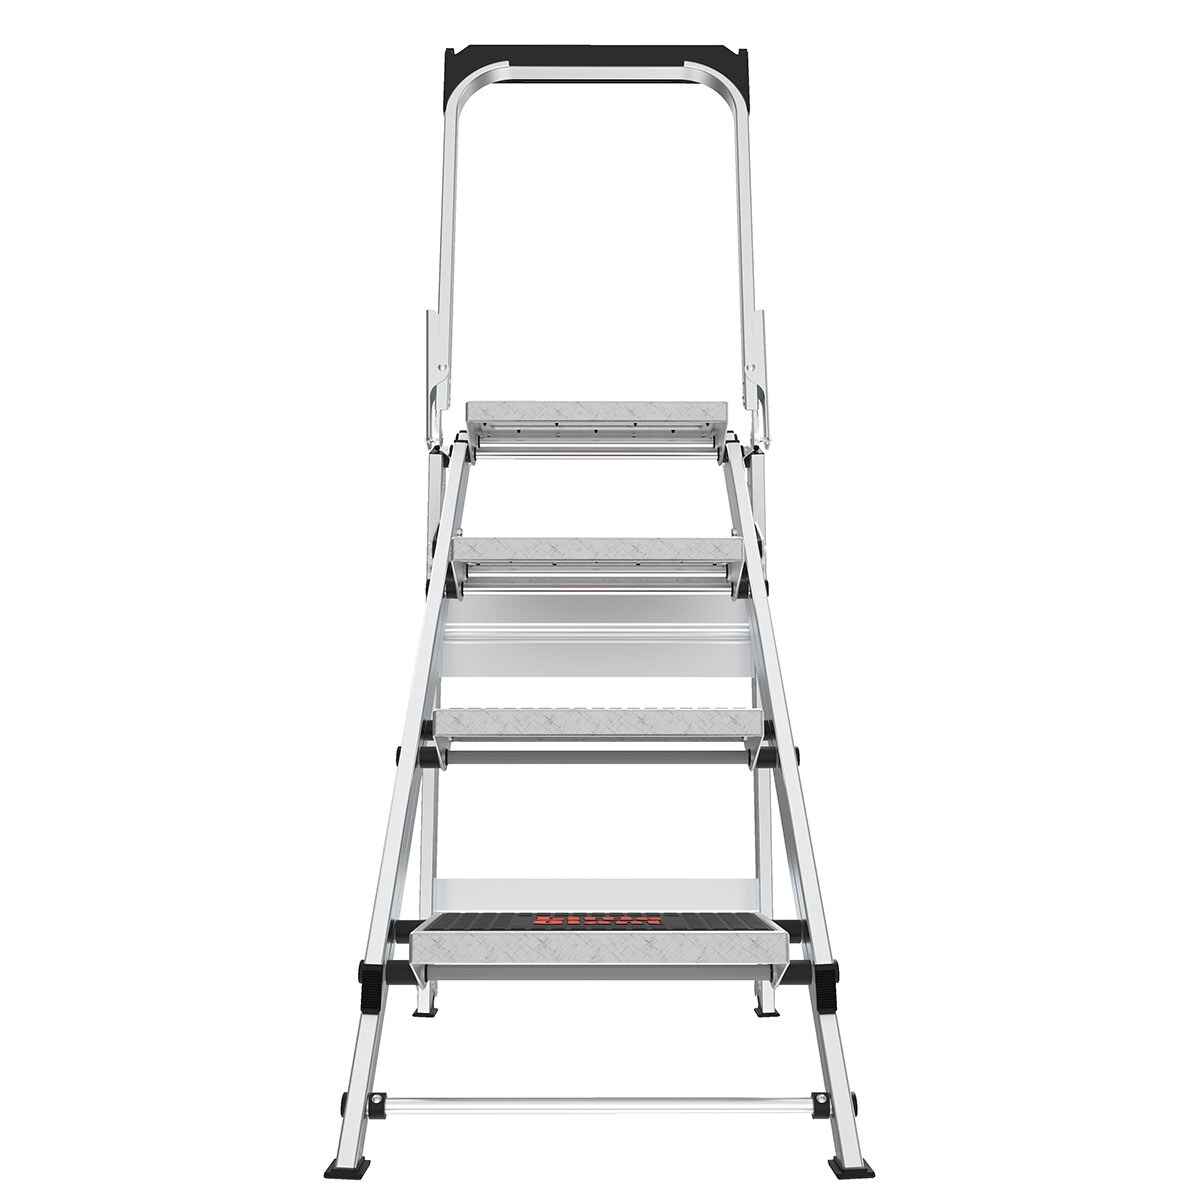 4 step Little Giant Safety Step Ladder jumbo 10410BA In stock ready to Ship 